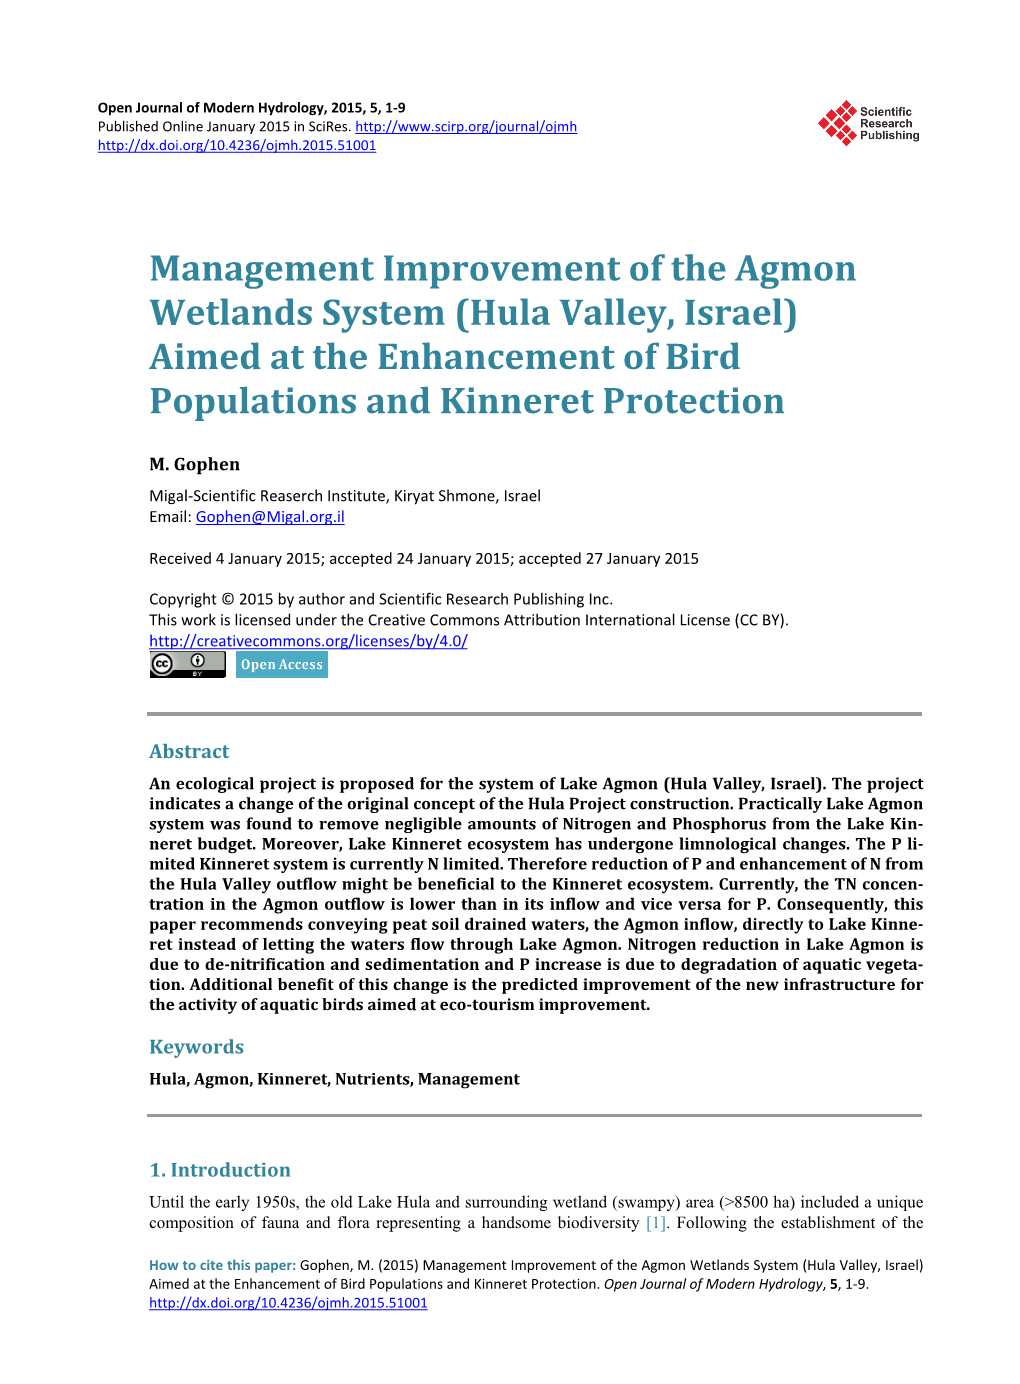 Management Improvement of the Agmon Wetlands System (Hula Valley, Israel) Aimed at the Enhancement of Bird Populations and Kinneret Protection